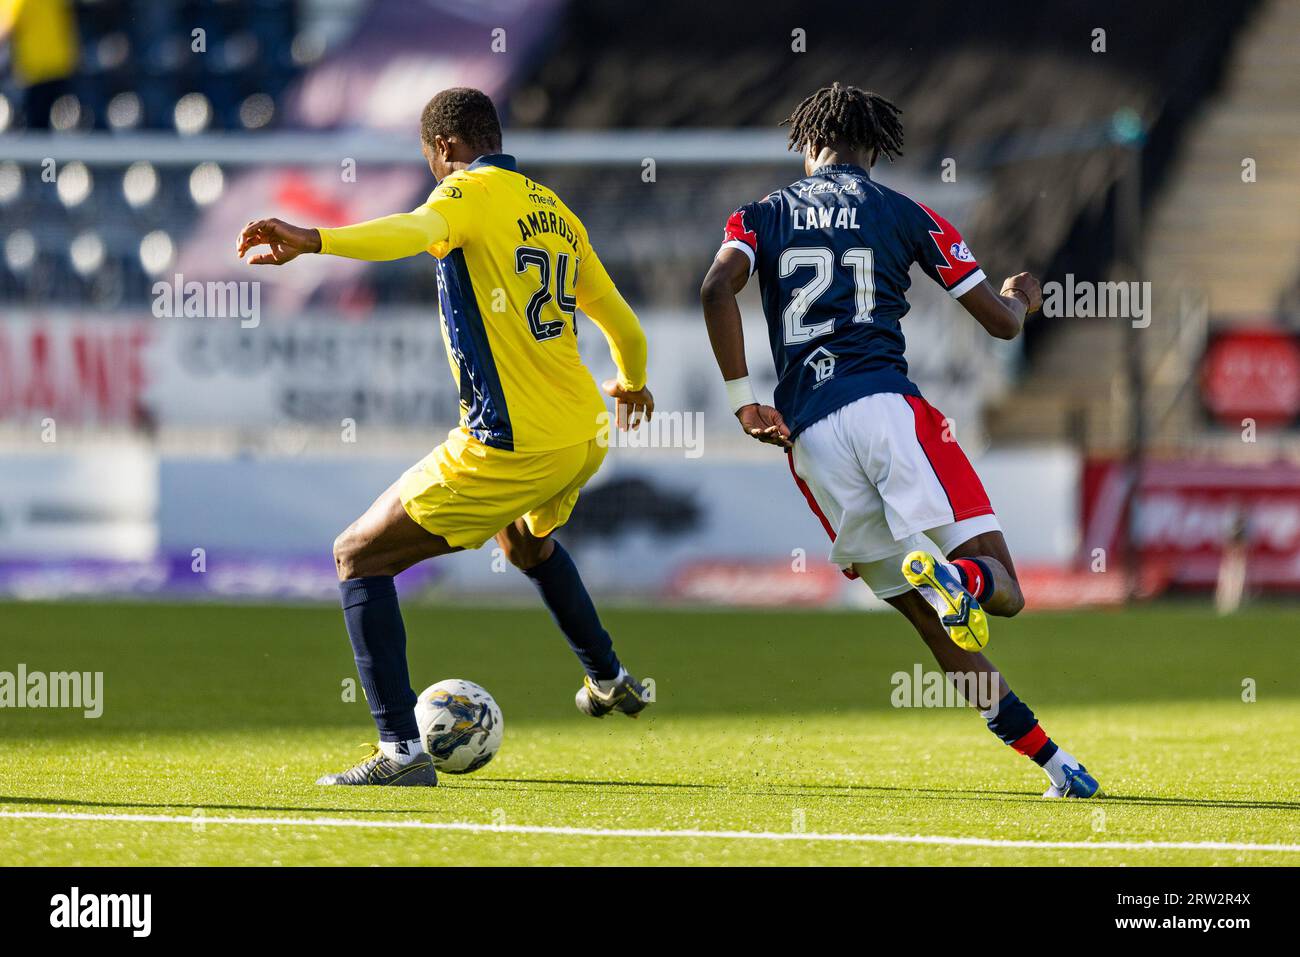 Falkirk, Scotland. 16 September 2023.  Efe Ambrose (24 - Queen of the South) and Ola Lawal (21 - Falkirk) battle for the ball  Falkirk Vs Queen of the South, Cinch League One  Credit: Raymond Davies / Alamy Live News Stock Photo